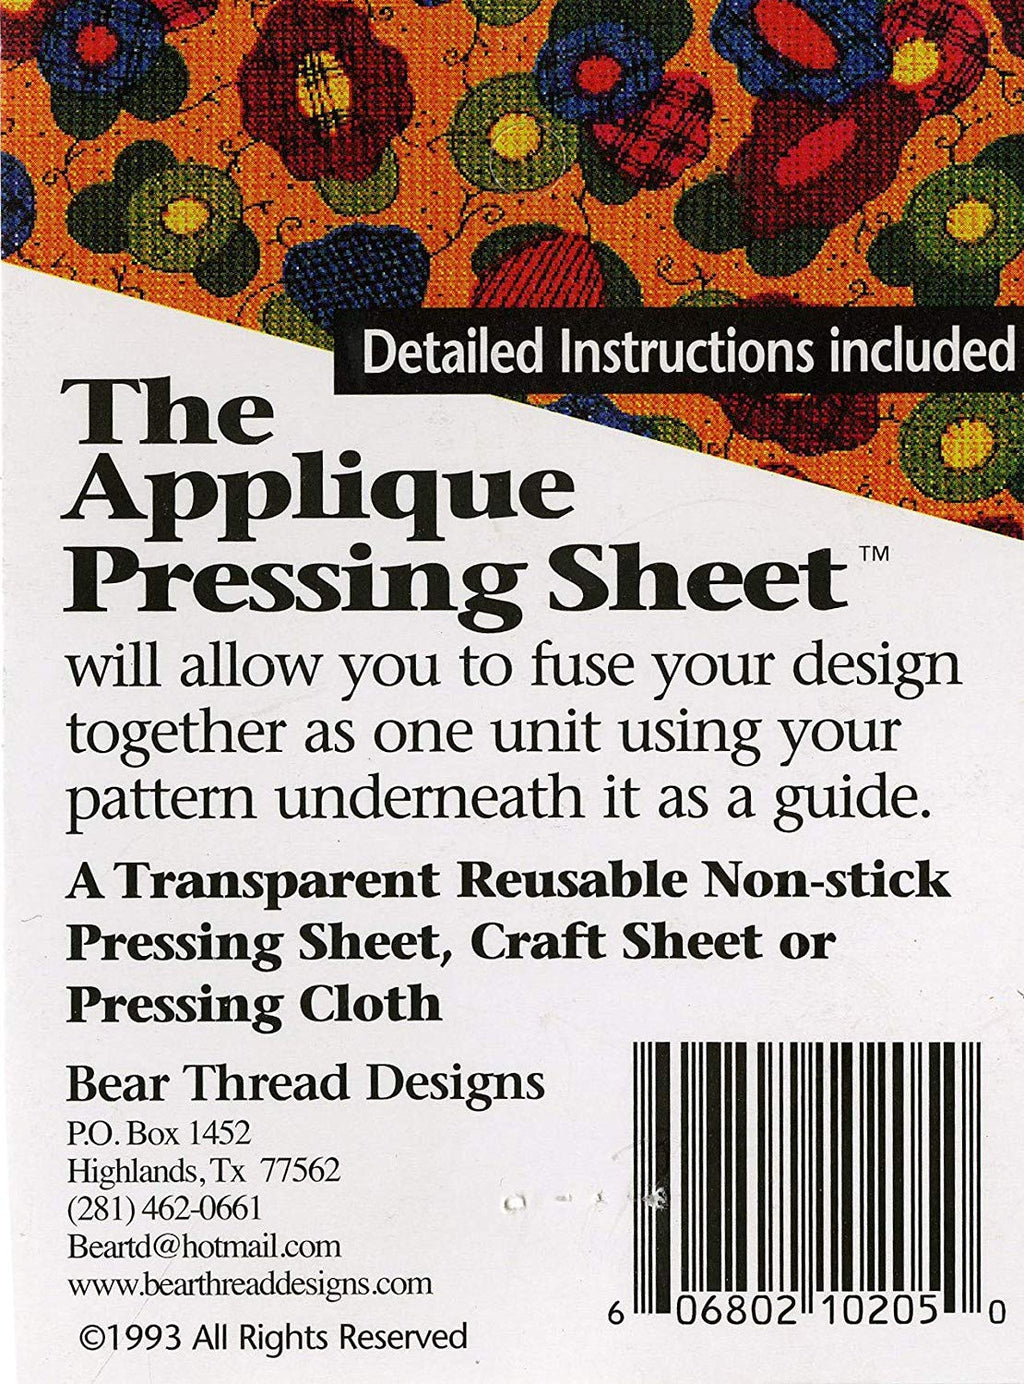 PRESSING SHEET ROLLED APPLIQUE 18INX20IN - 606802102098